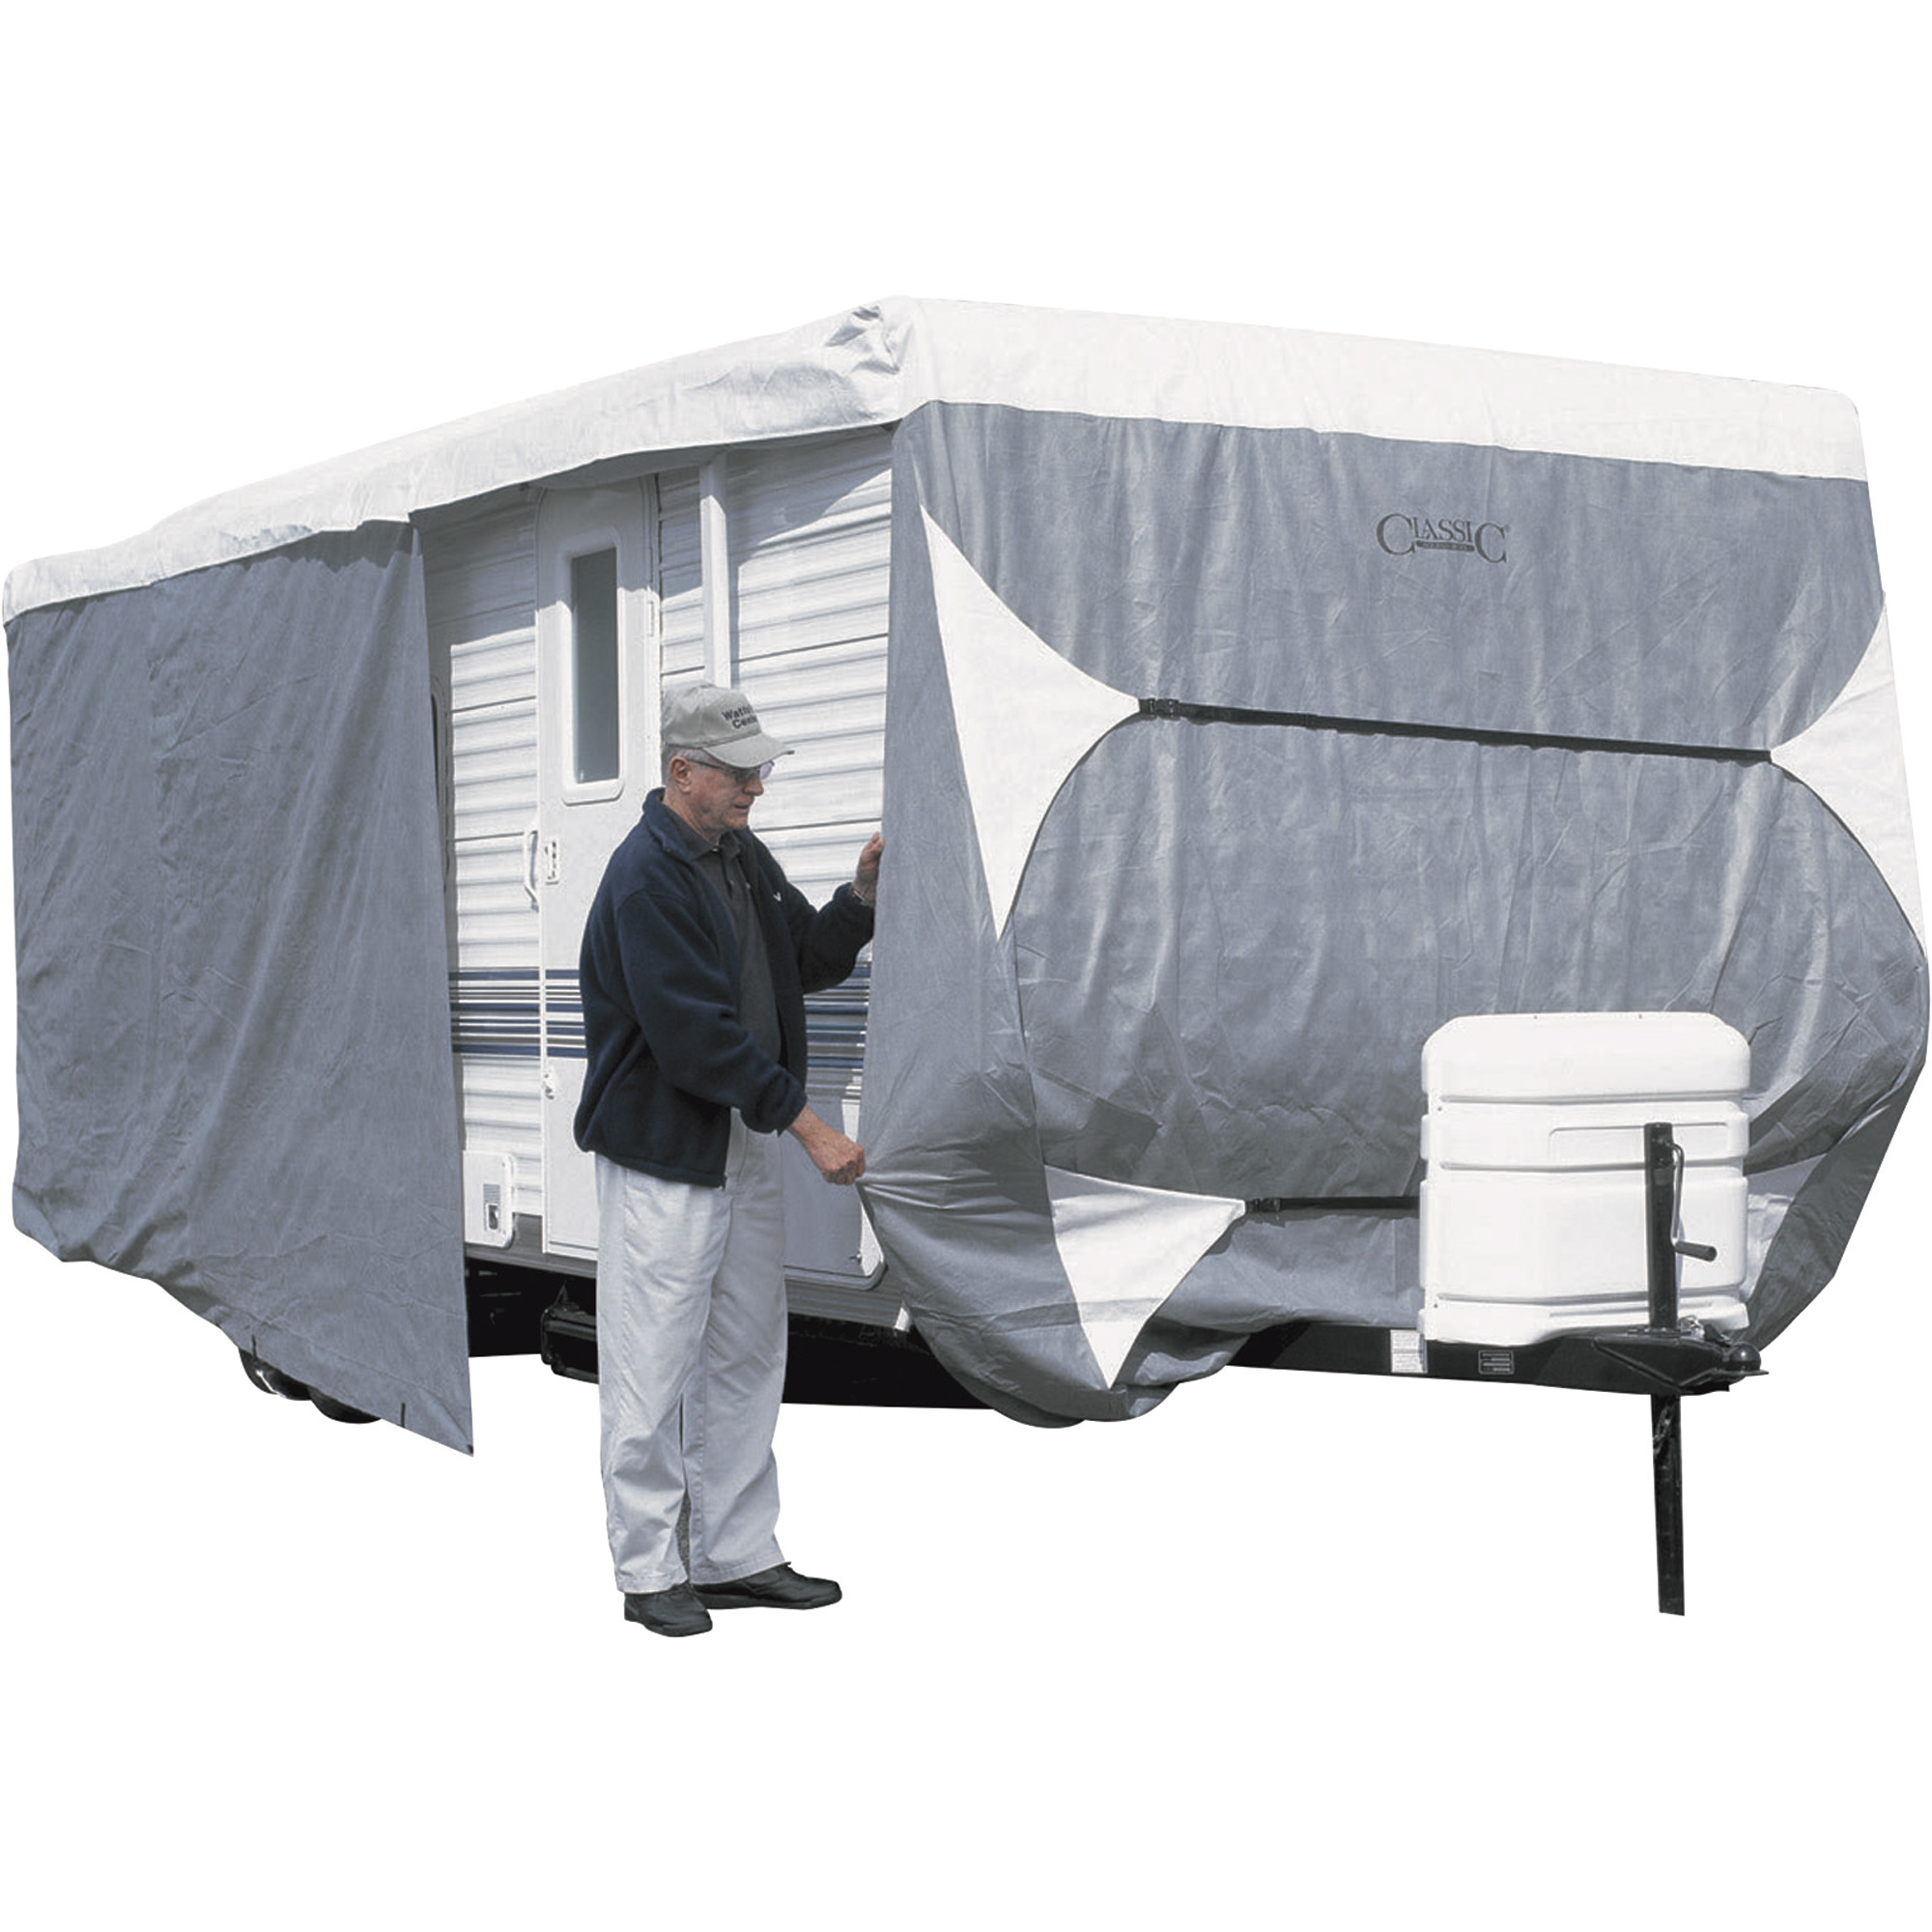 Classic Accessories OverDrive PolyPro Deluxe Travel Trailer Cover — Model  6, Gray and White, Fits x RVs, Model# 73663  Northern Tool